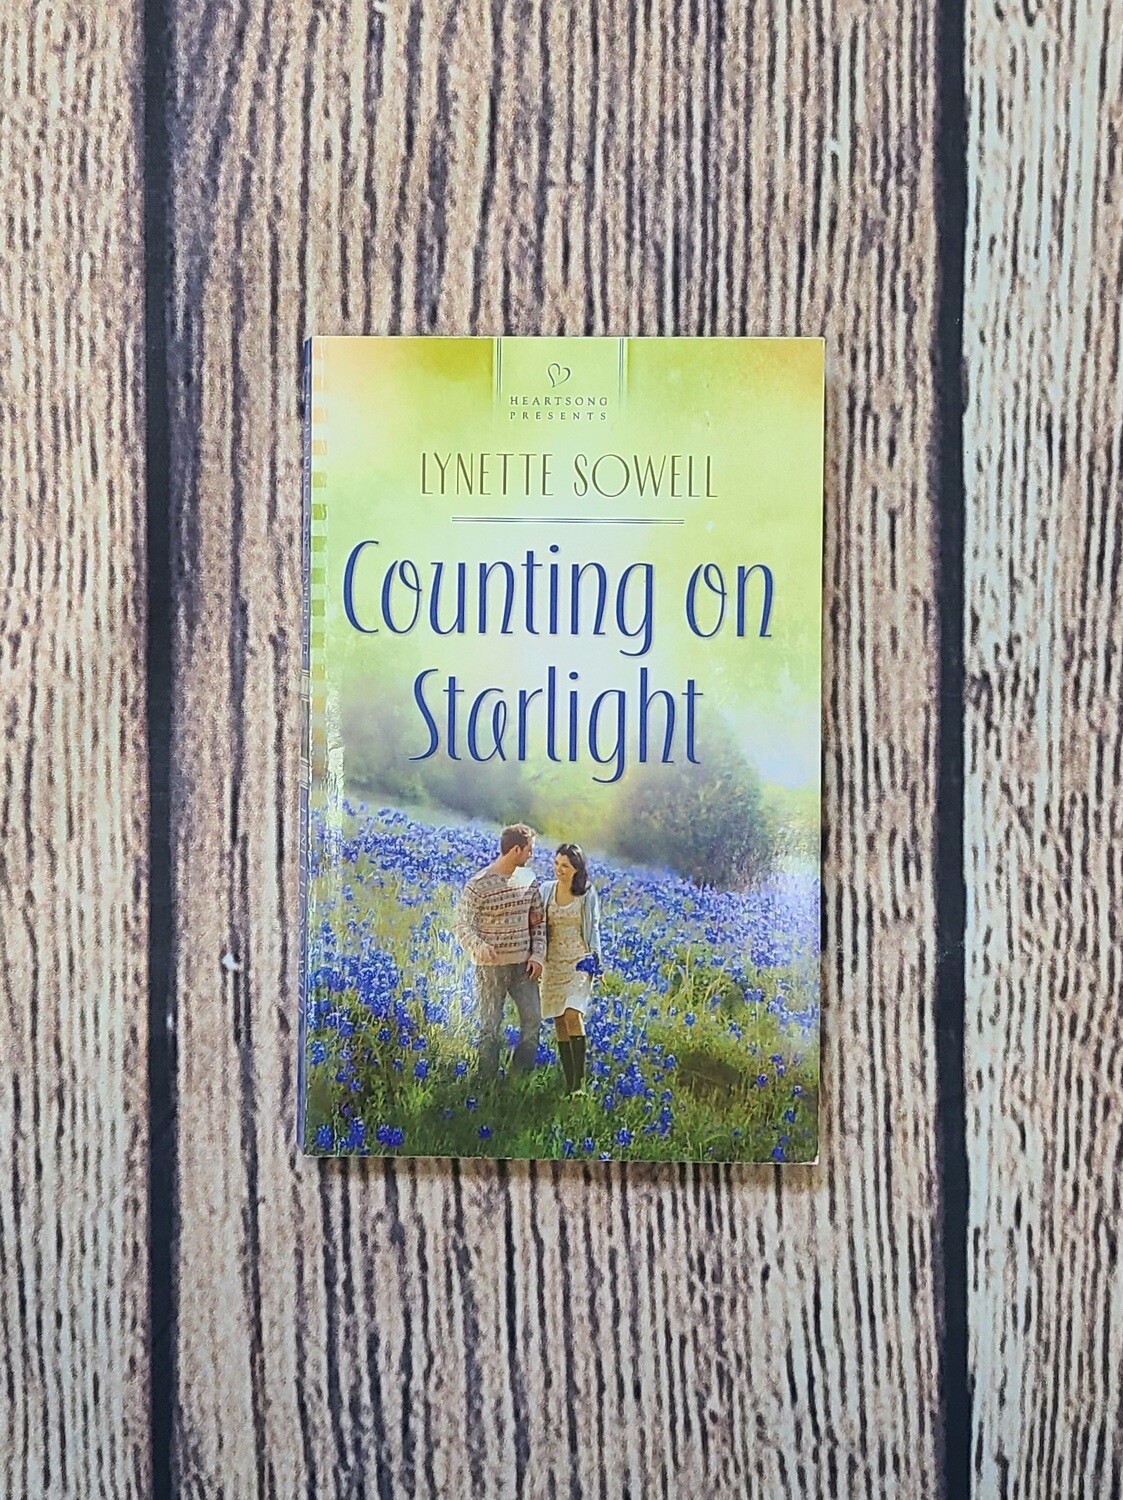 Counting on Starlight by Lynette Sowell